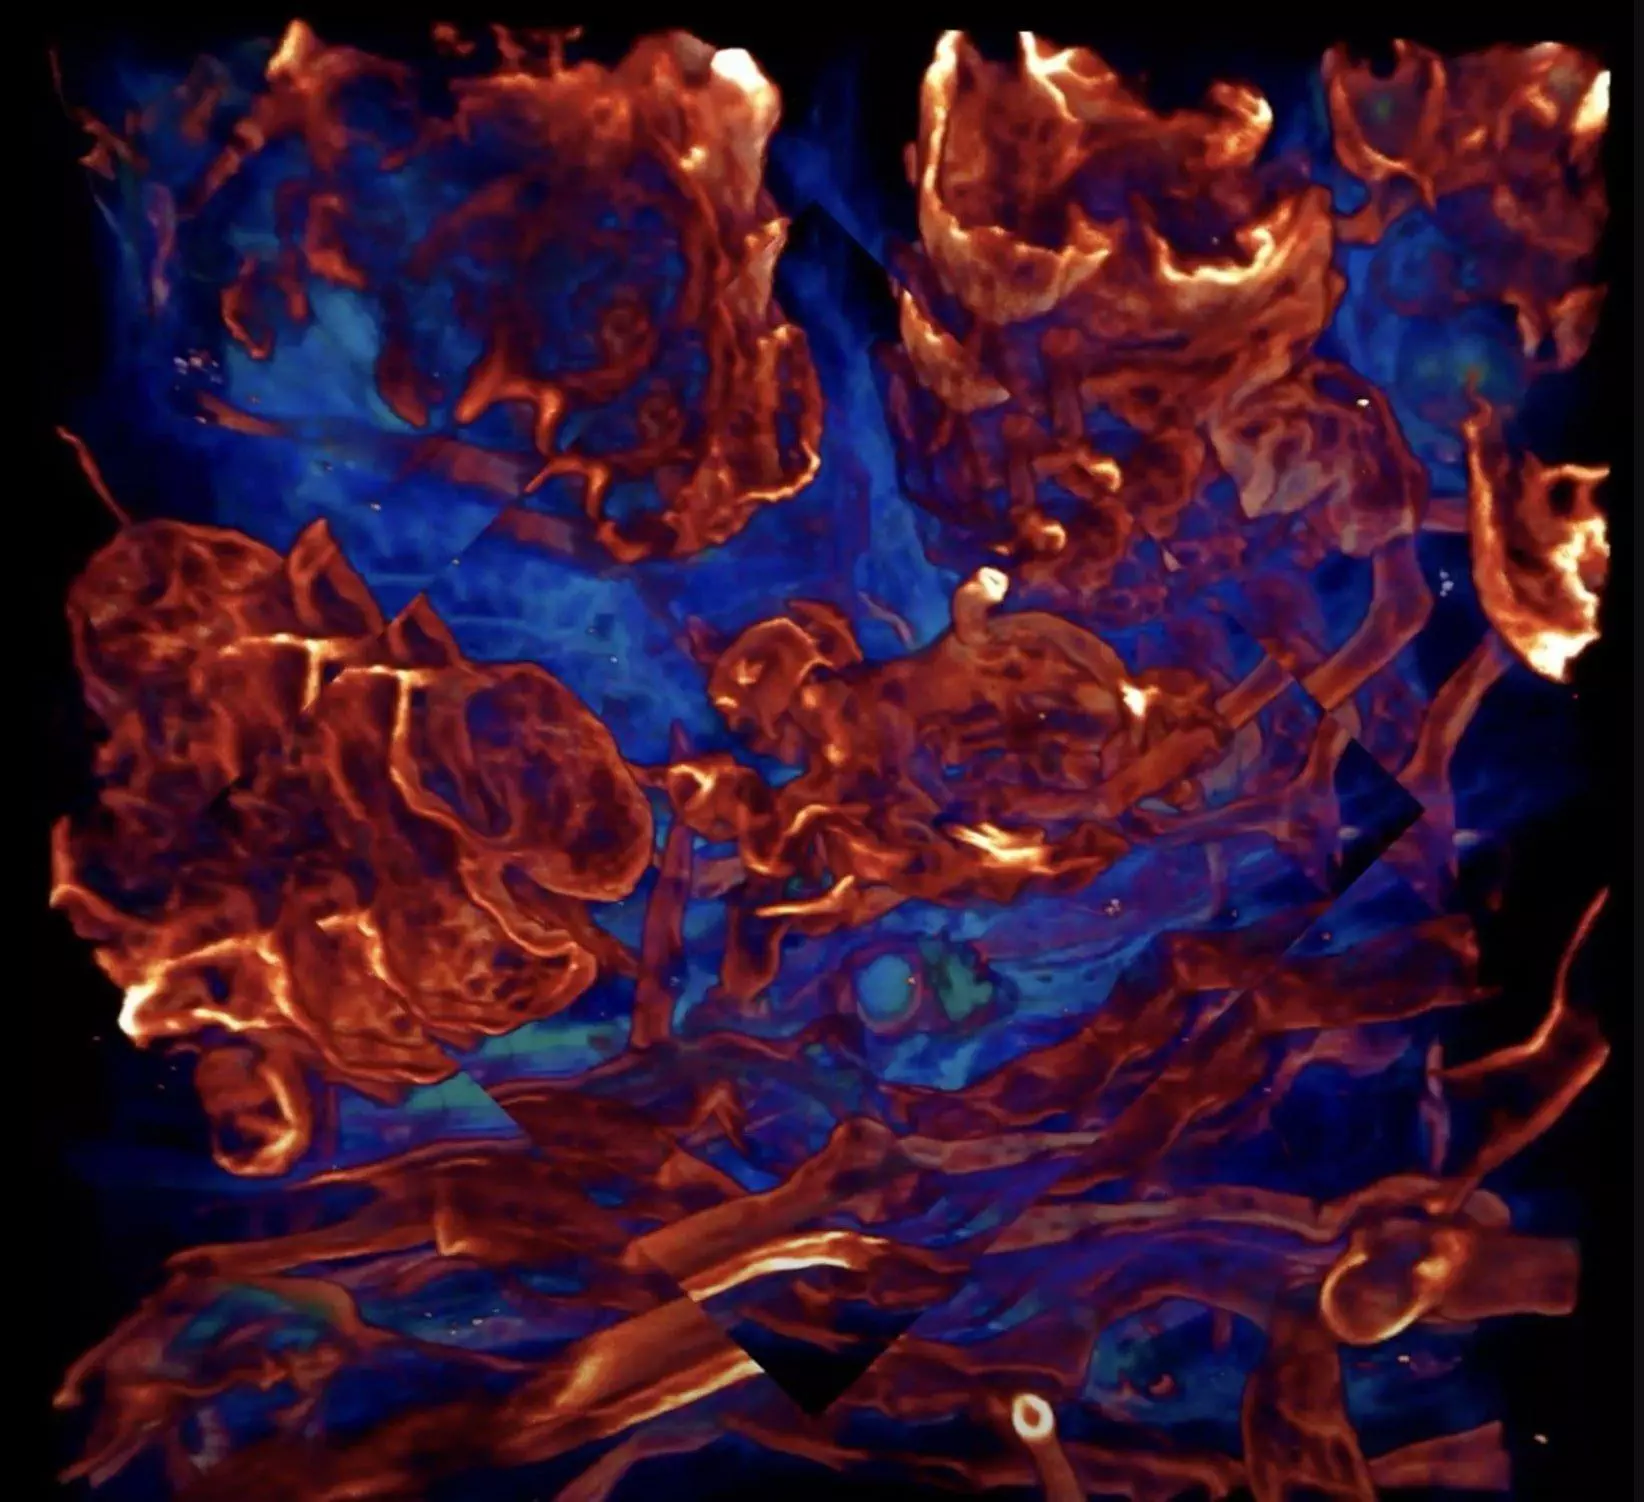 Artistic image of fungal network in shades of blue and red